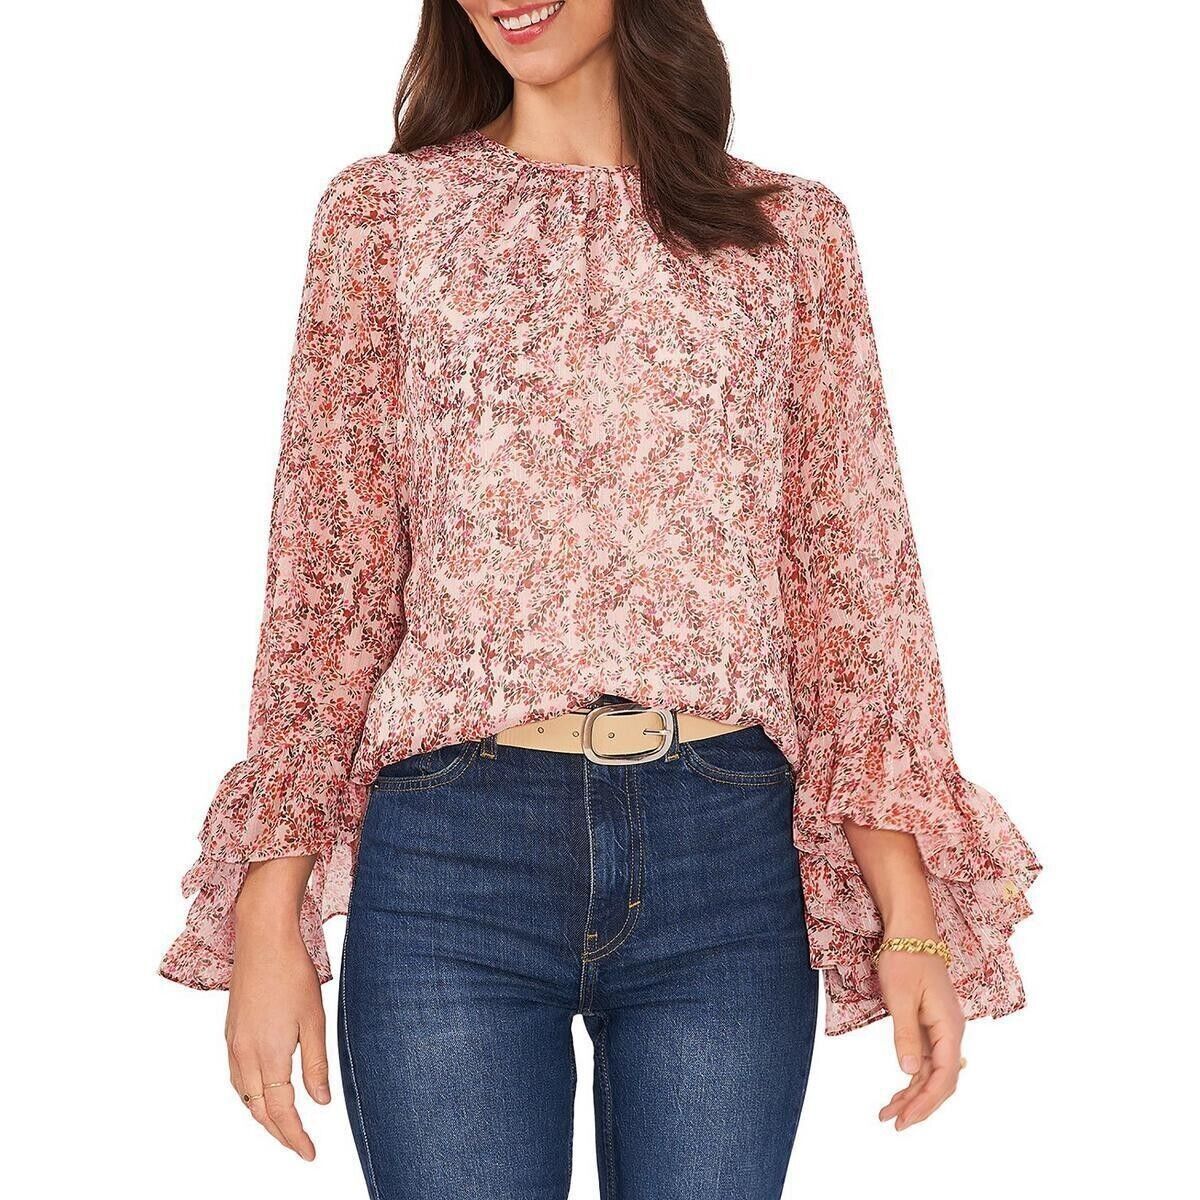 Primary image for Vince Camuto Women's Floral Print Ruffled Sleeve Top Pink XXS B4HP $99